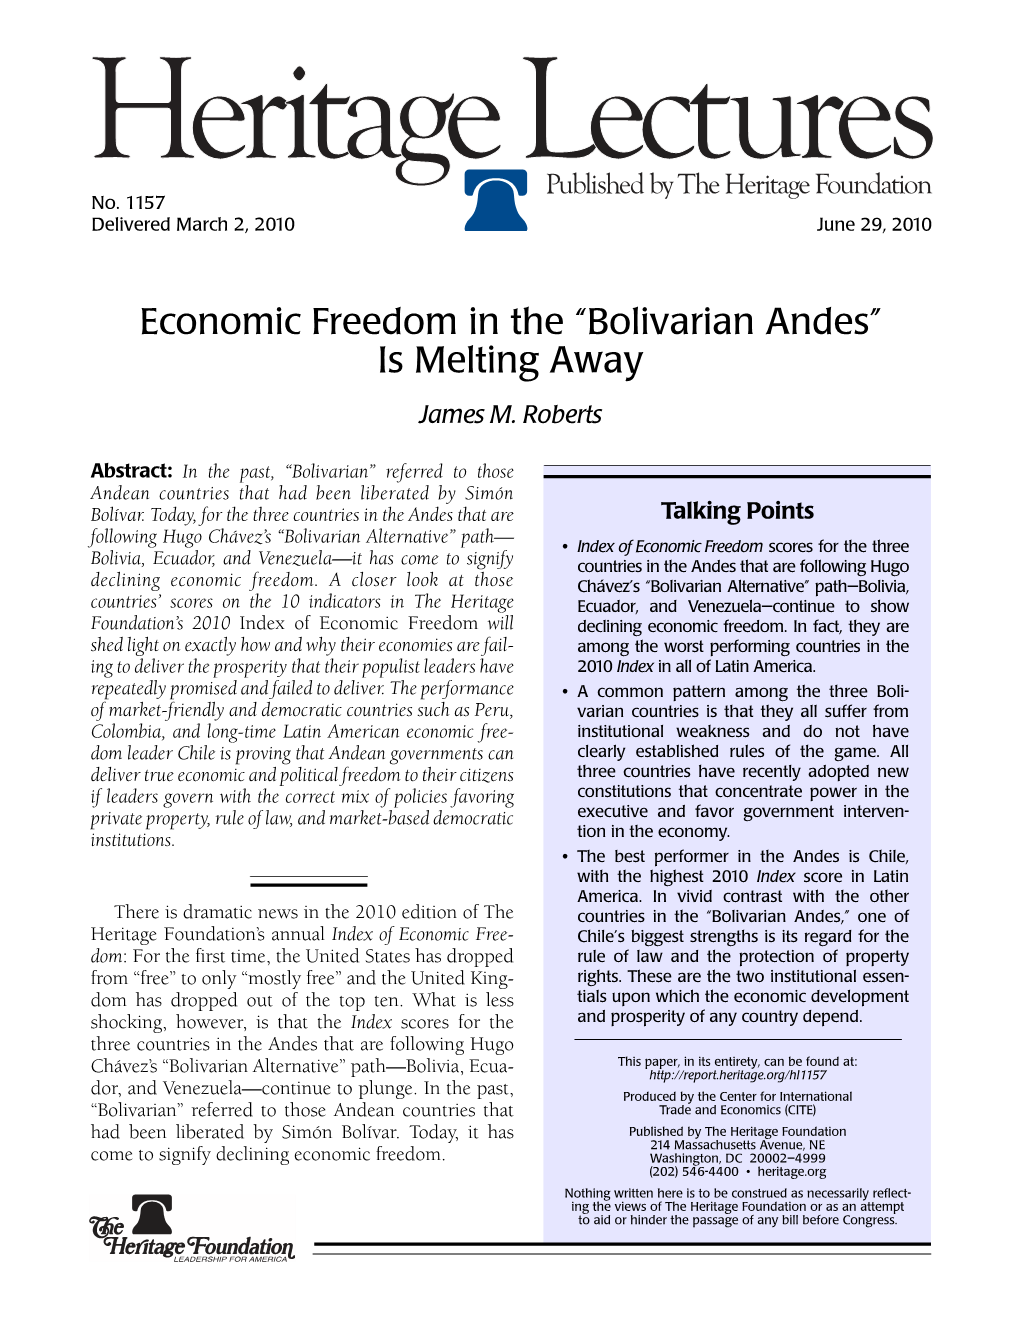 Economic Freedom in the “Bolivarian Andes” Is Melting Away James M